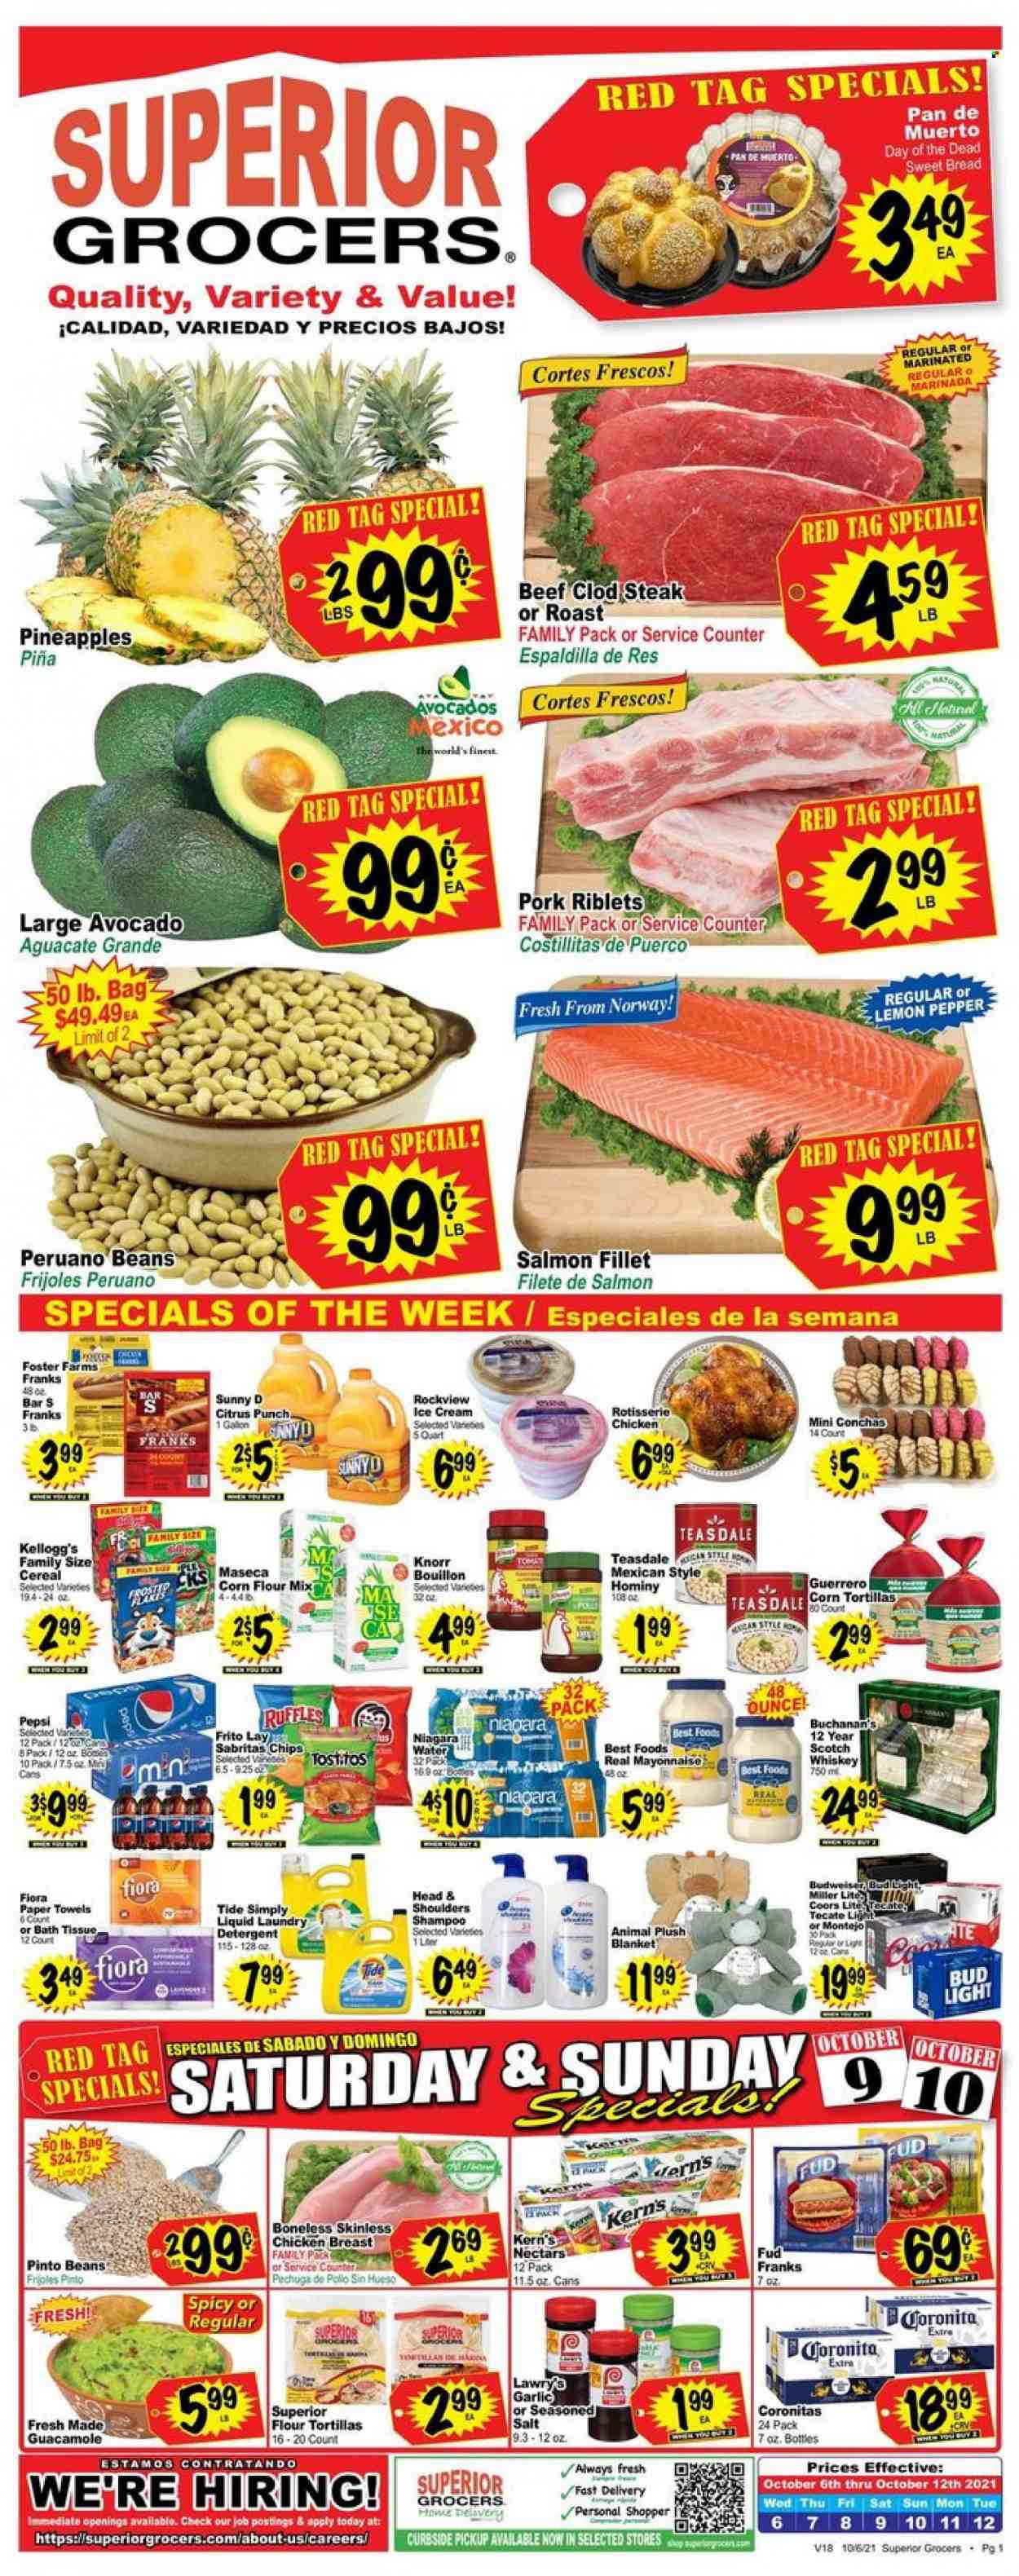 thumbnail - Superior Grocers Flyer - 10/06/2021 - 10/12/2021 - Sales products - bread, corn tortillas, tortillas, flour tortillas, sweet bread, beans, garlic, pineapple, chicken breasts, steak, salmon, salmon fillet, chicken roast, Knorr, guacamole, ice cream, Kellogg's, chips, Ruffles, Tostitos, bouillon, corn flour, pinto beans, cereals, Pepsi, Kern's, fruit punch, whiskey, whisky, beer, Bud Light, Tide, laundry detergent, Head & Shoulders, pan, bread pan, Budweiser, Miller Lite, Coors. Page 1.